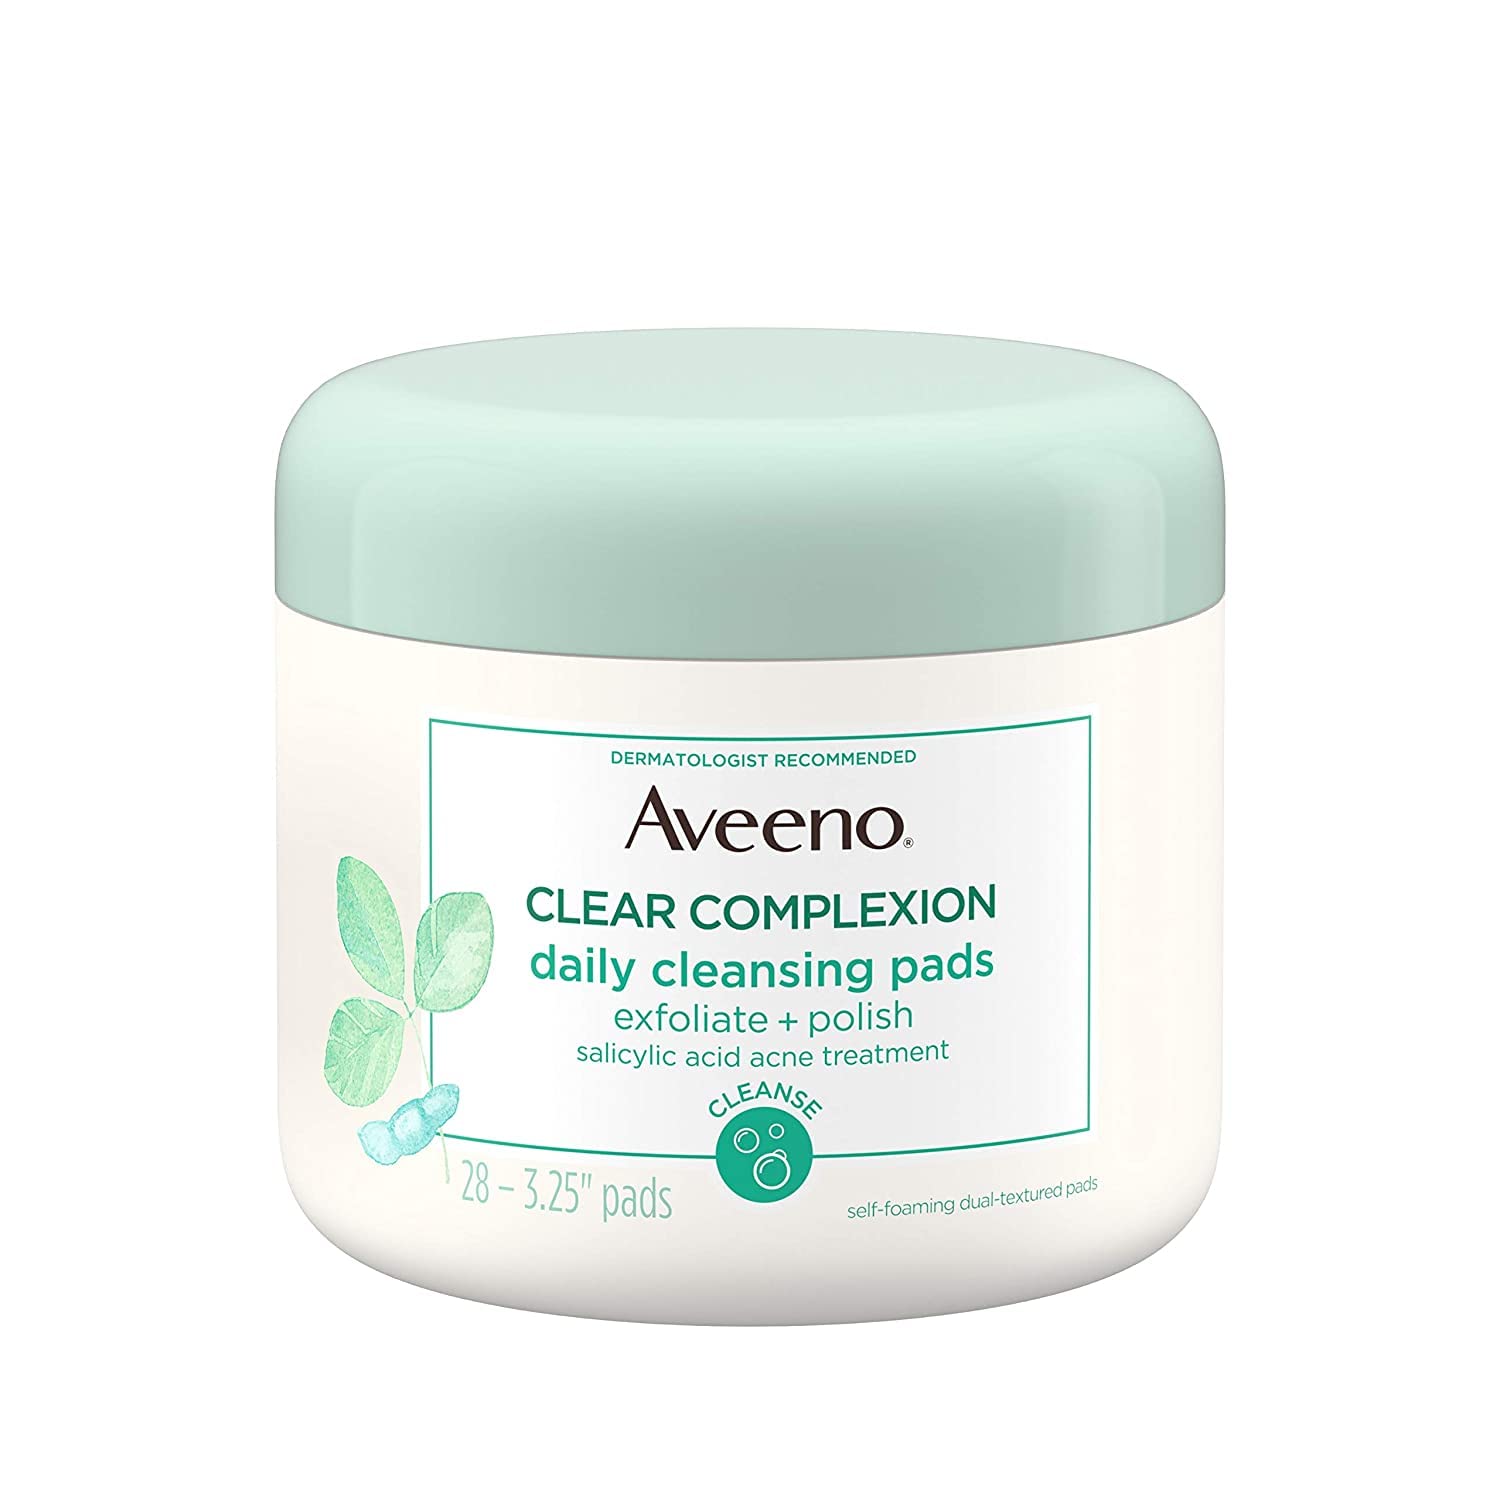 Aveeno Clear Complexion Daily Facial Cleansing Pads with Salicylic Acid Acne Treatment, 28 ct (Pack of 6)